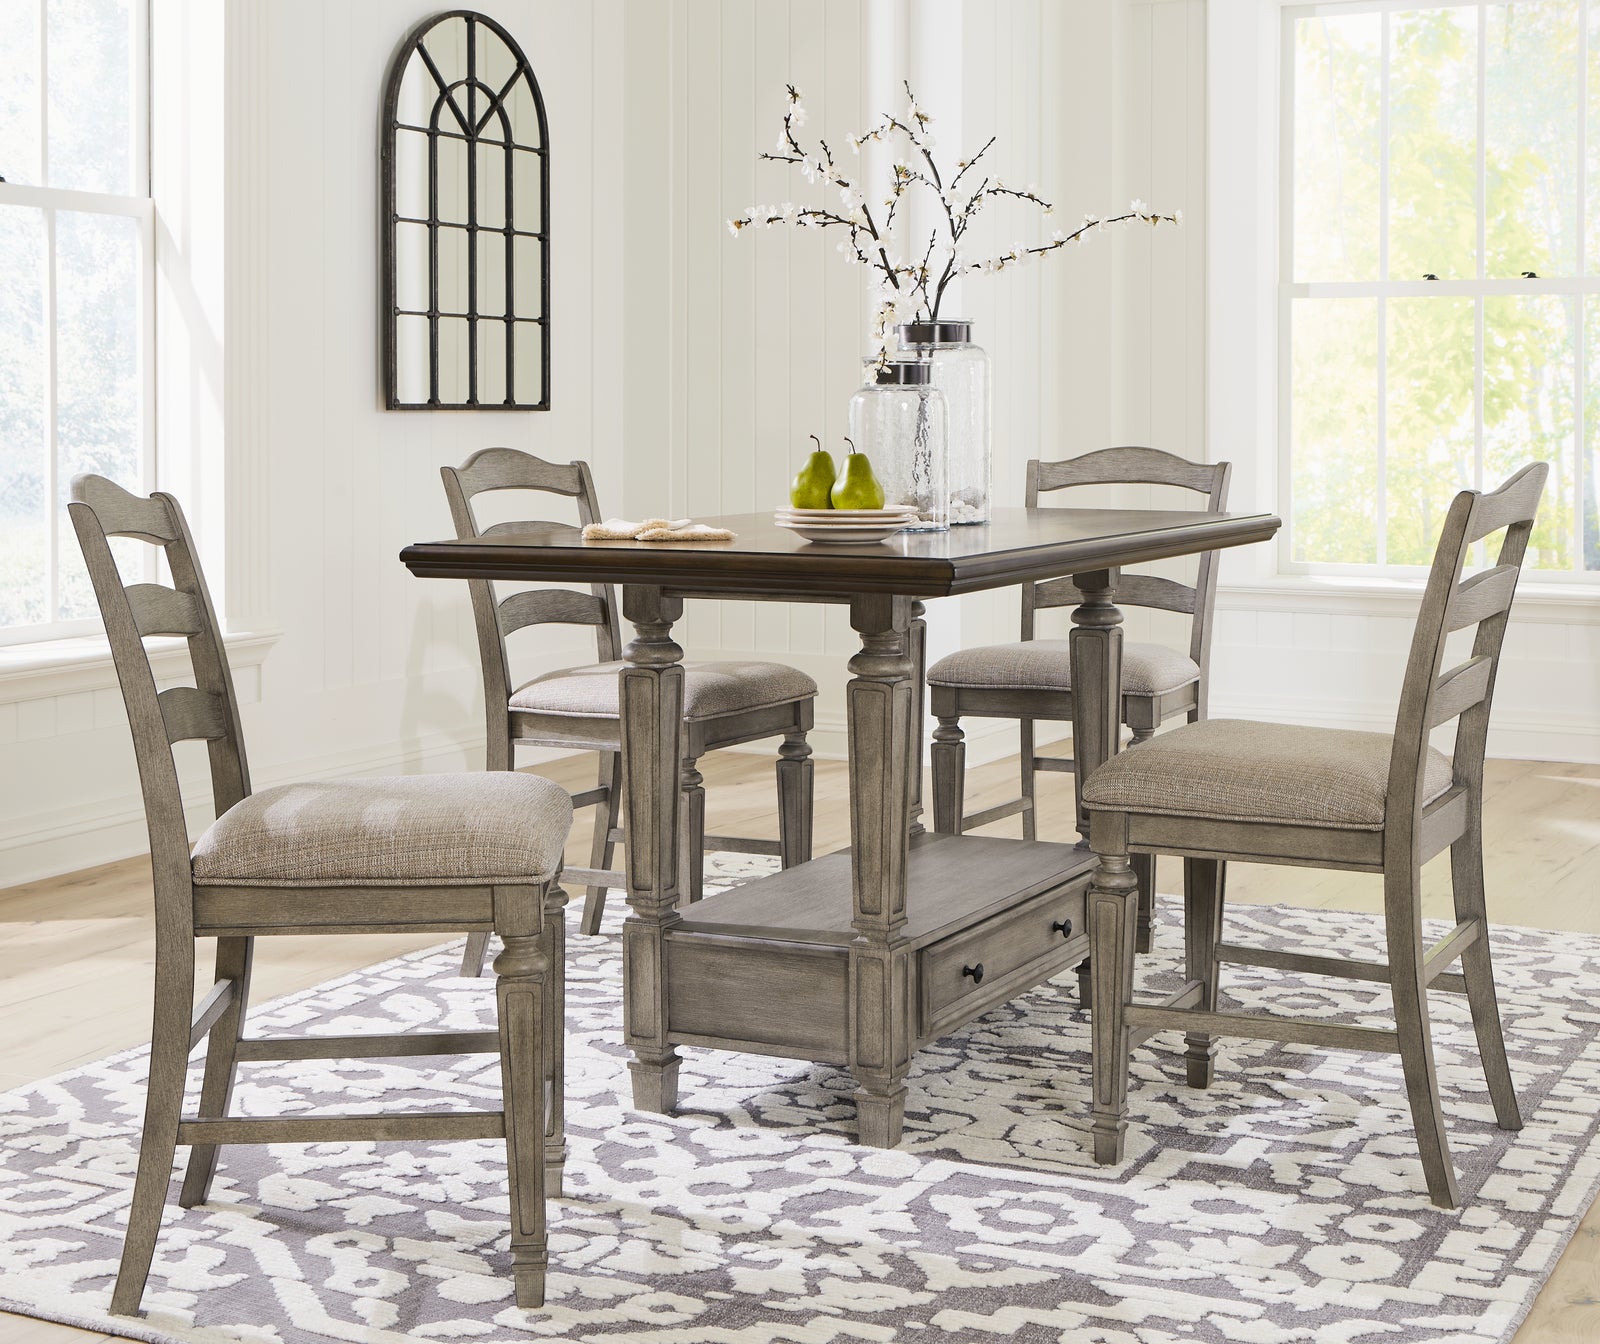 Lodenbay Antique Gray Counter Height Dining Table And 4 Barstools